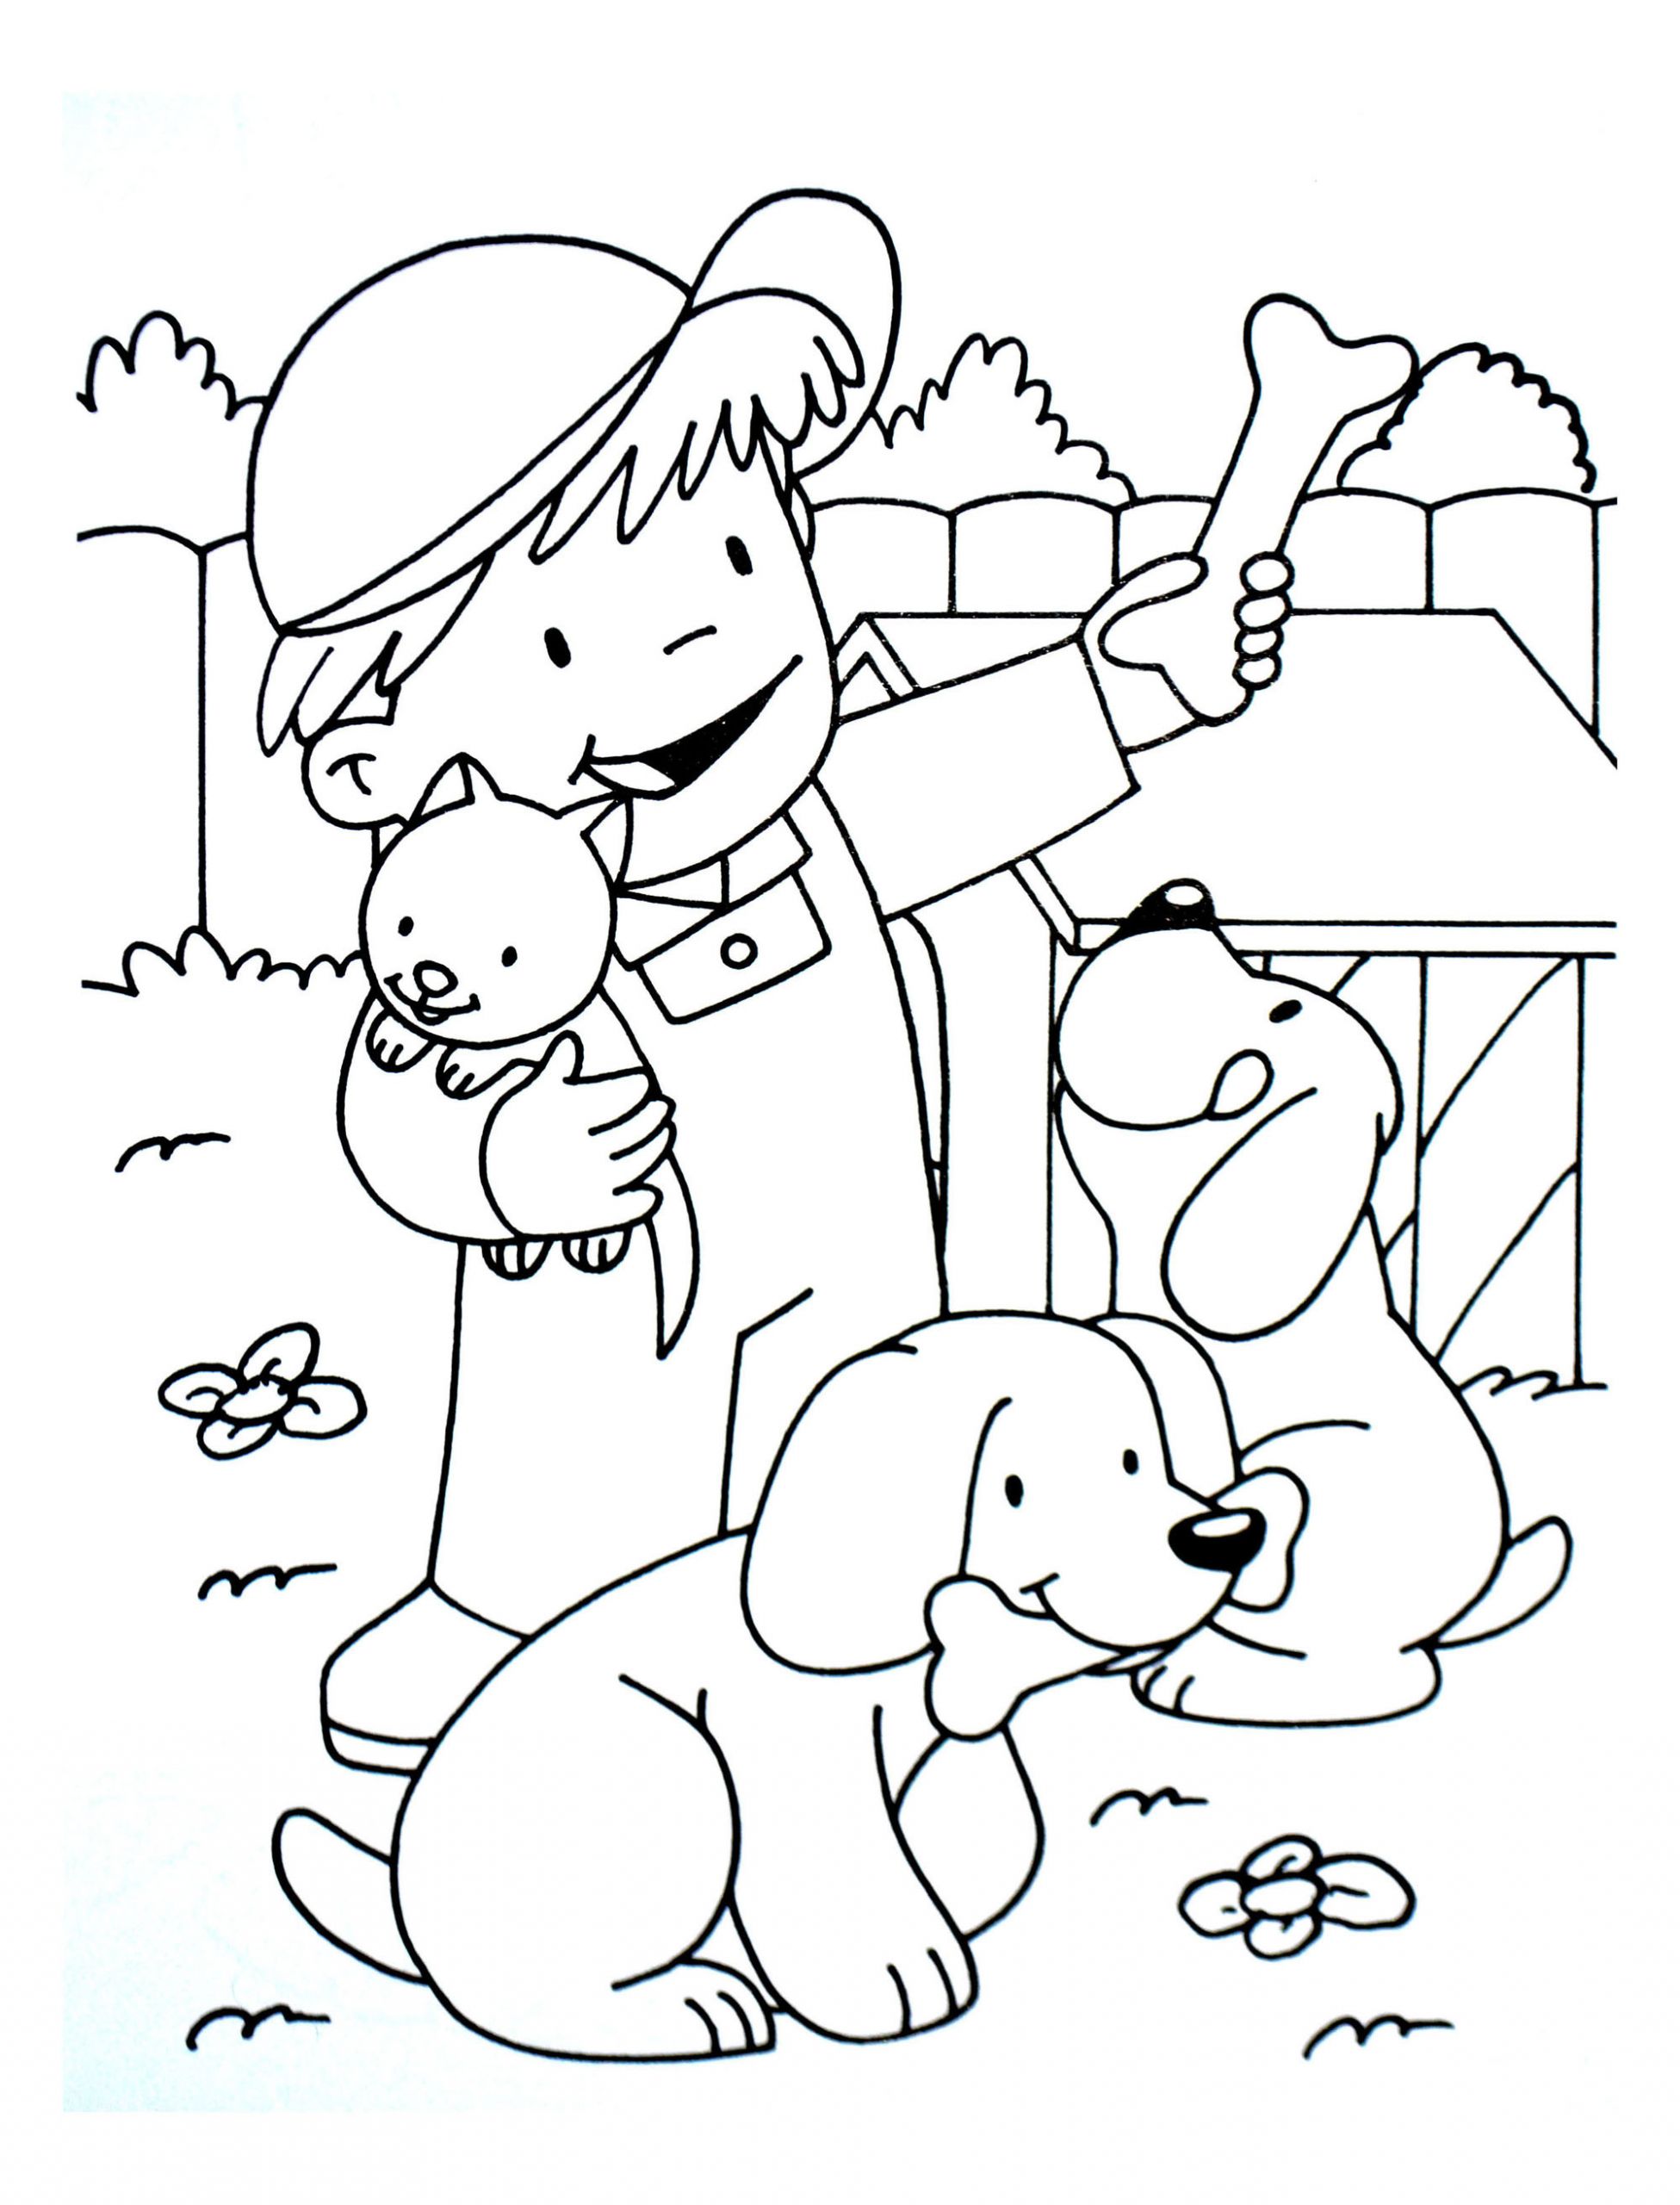 Farm Coloring Pages For Kids
 Farm to print Farm Kids Coloring Pages